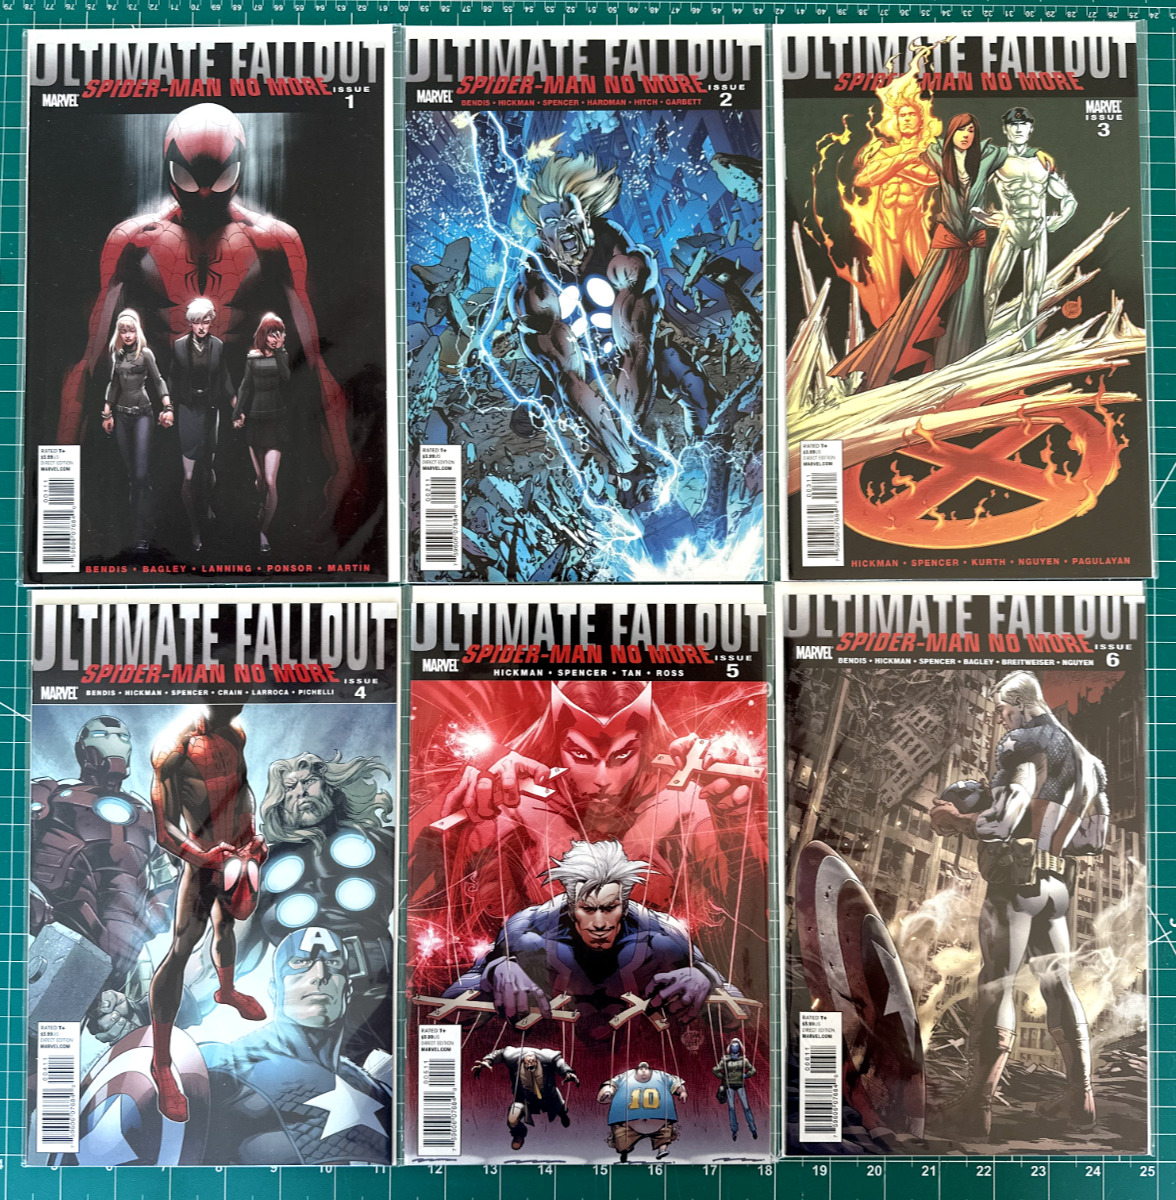 ULTIMATE FALLOUT #1-6 -- COMPLETE 1 2 3 4 5 6 -- 1ST MILES MORALES